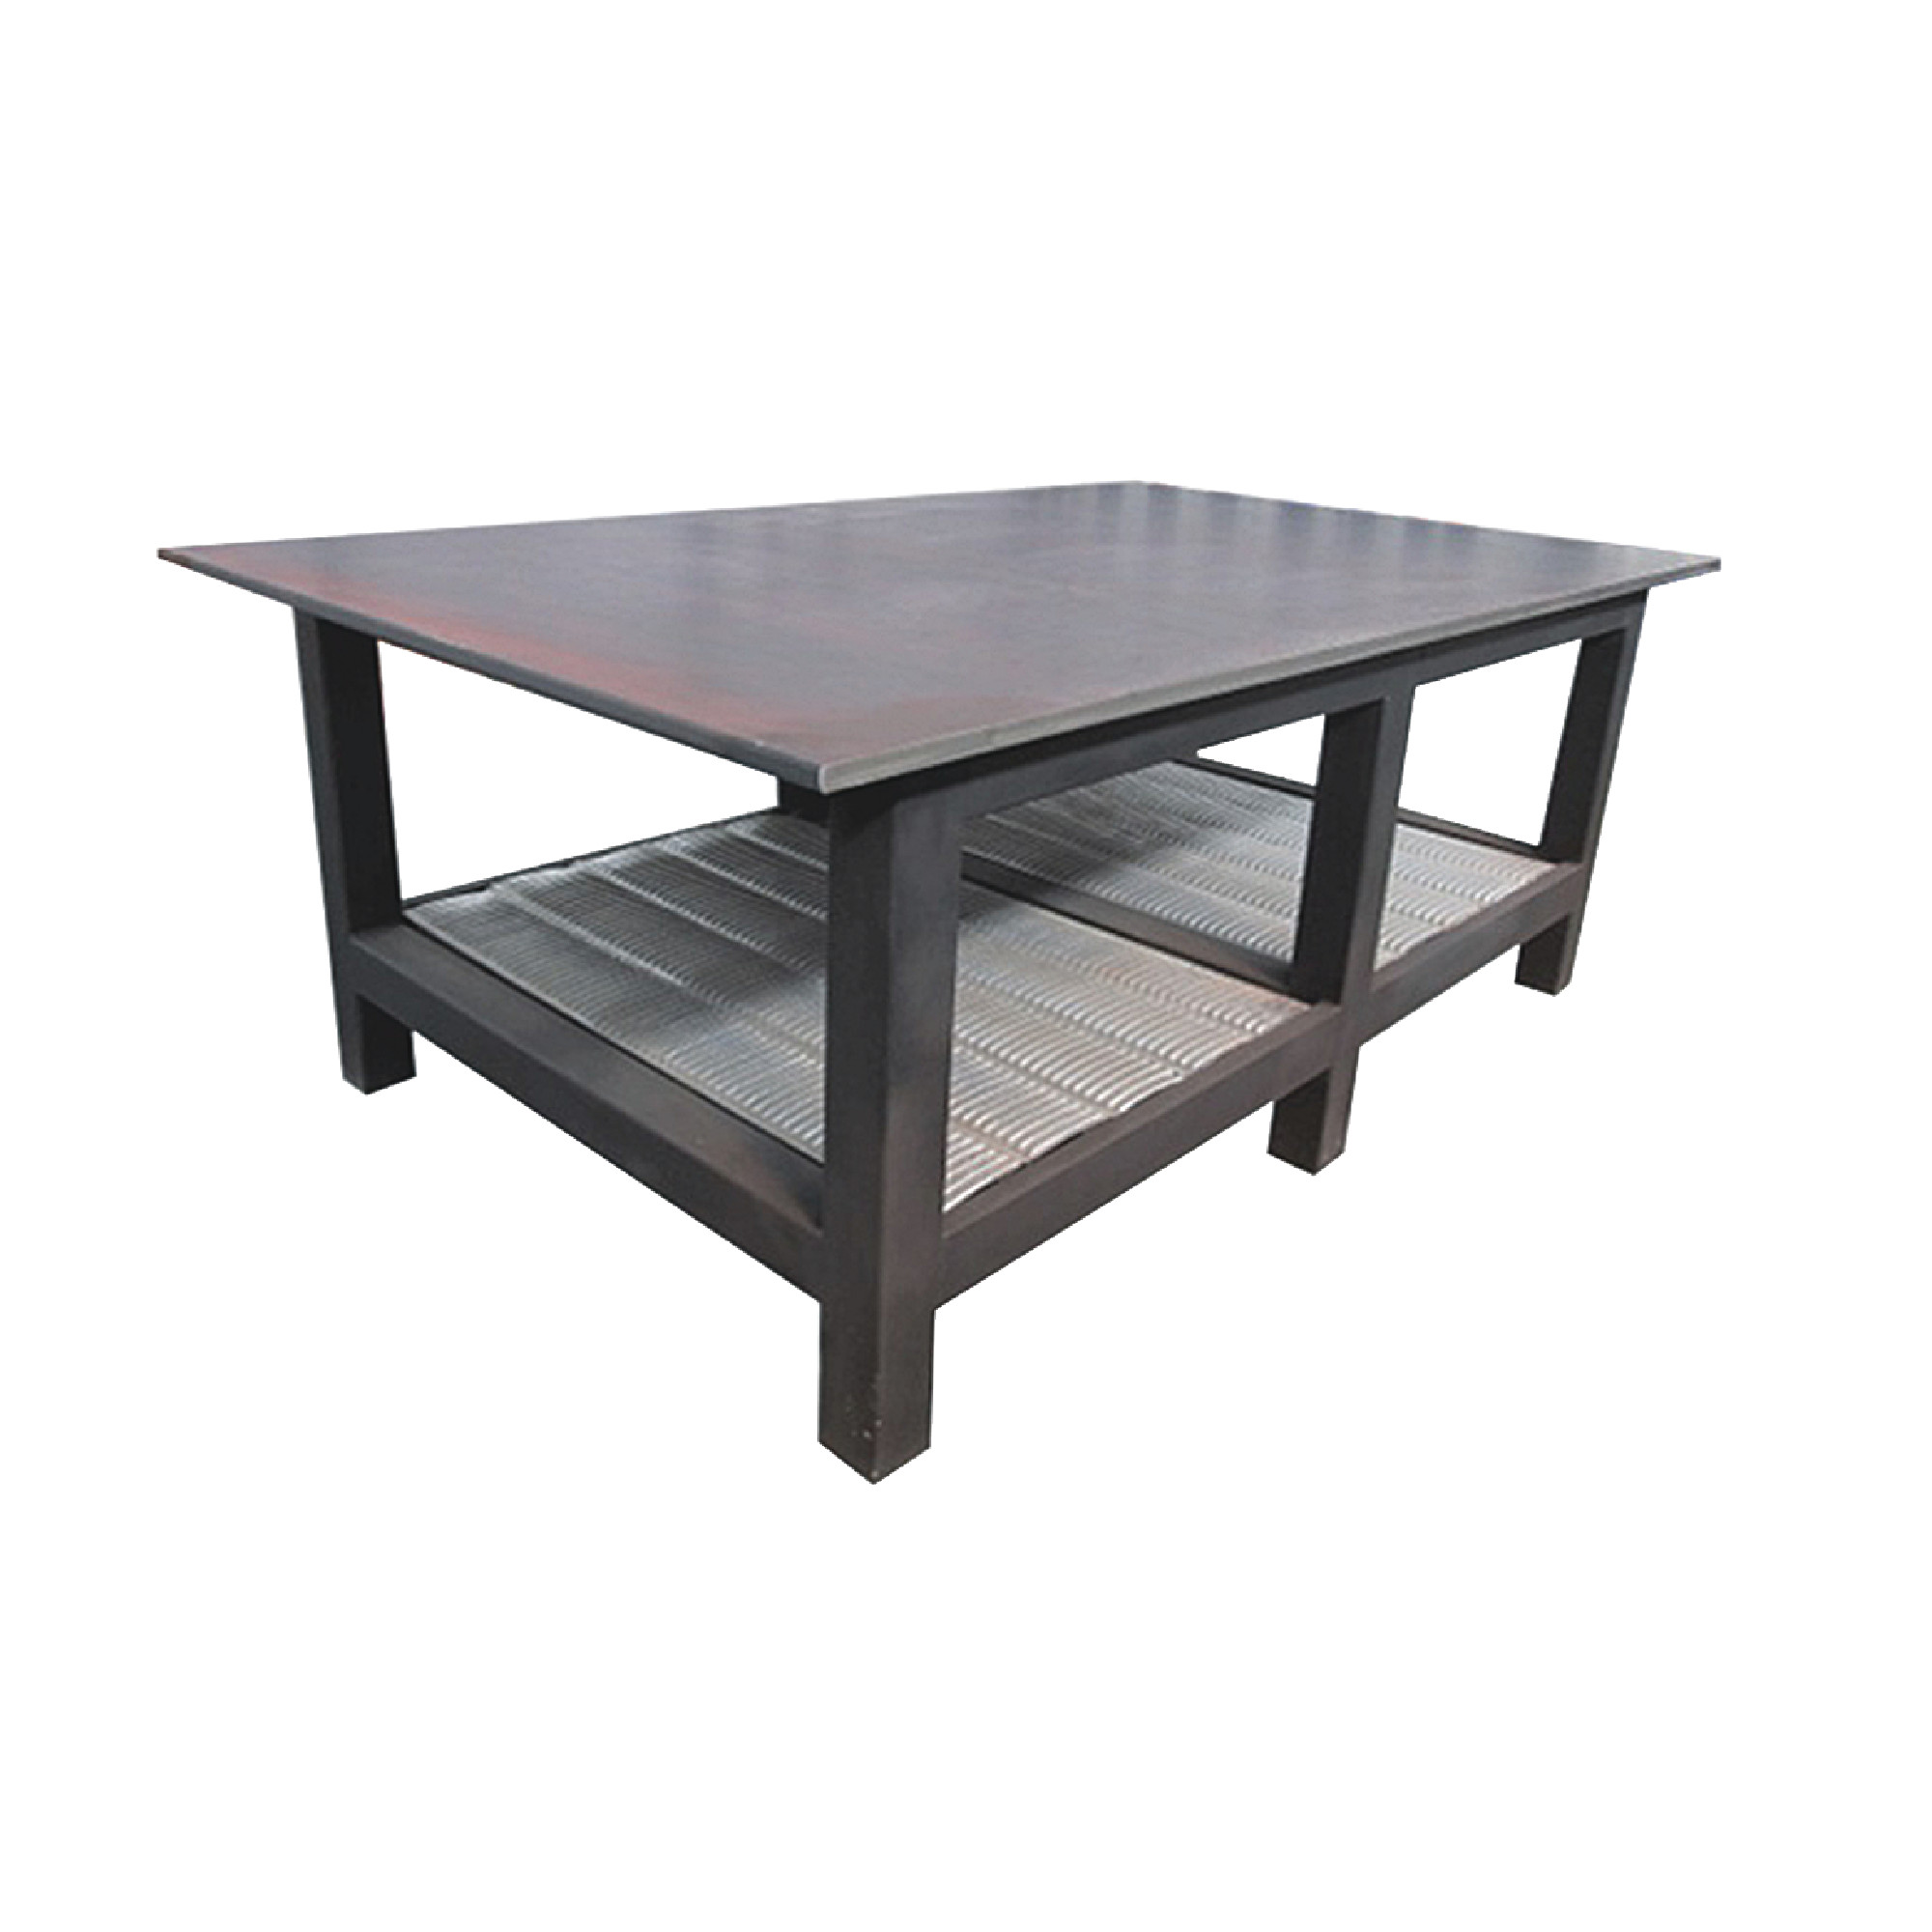 Welding Table With 1" Plate Steel Top & Casters